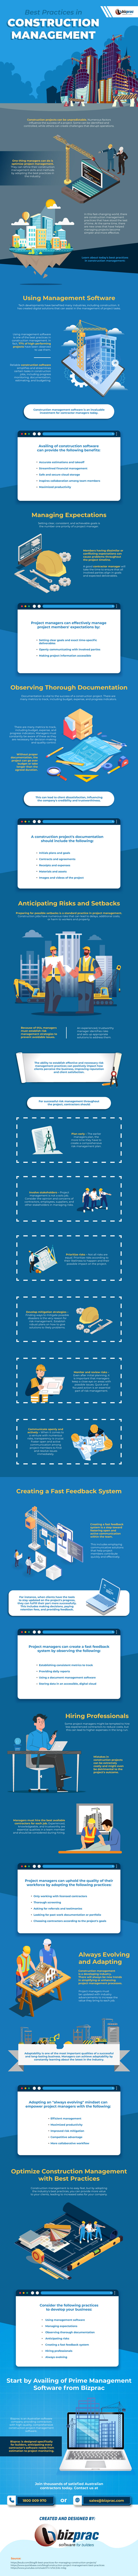 Best-Practices-in-Construction-Management-Infographic